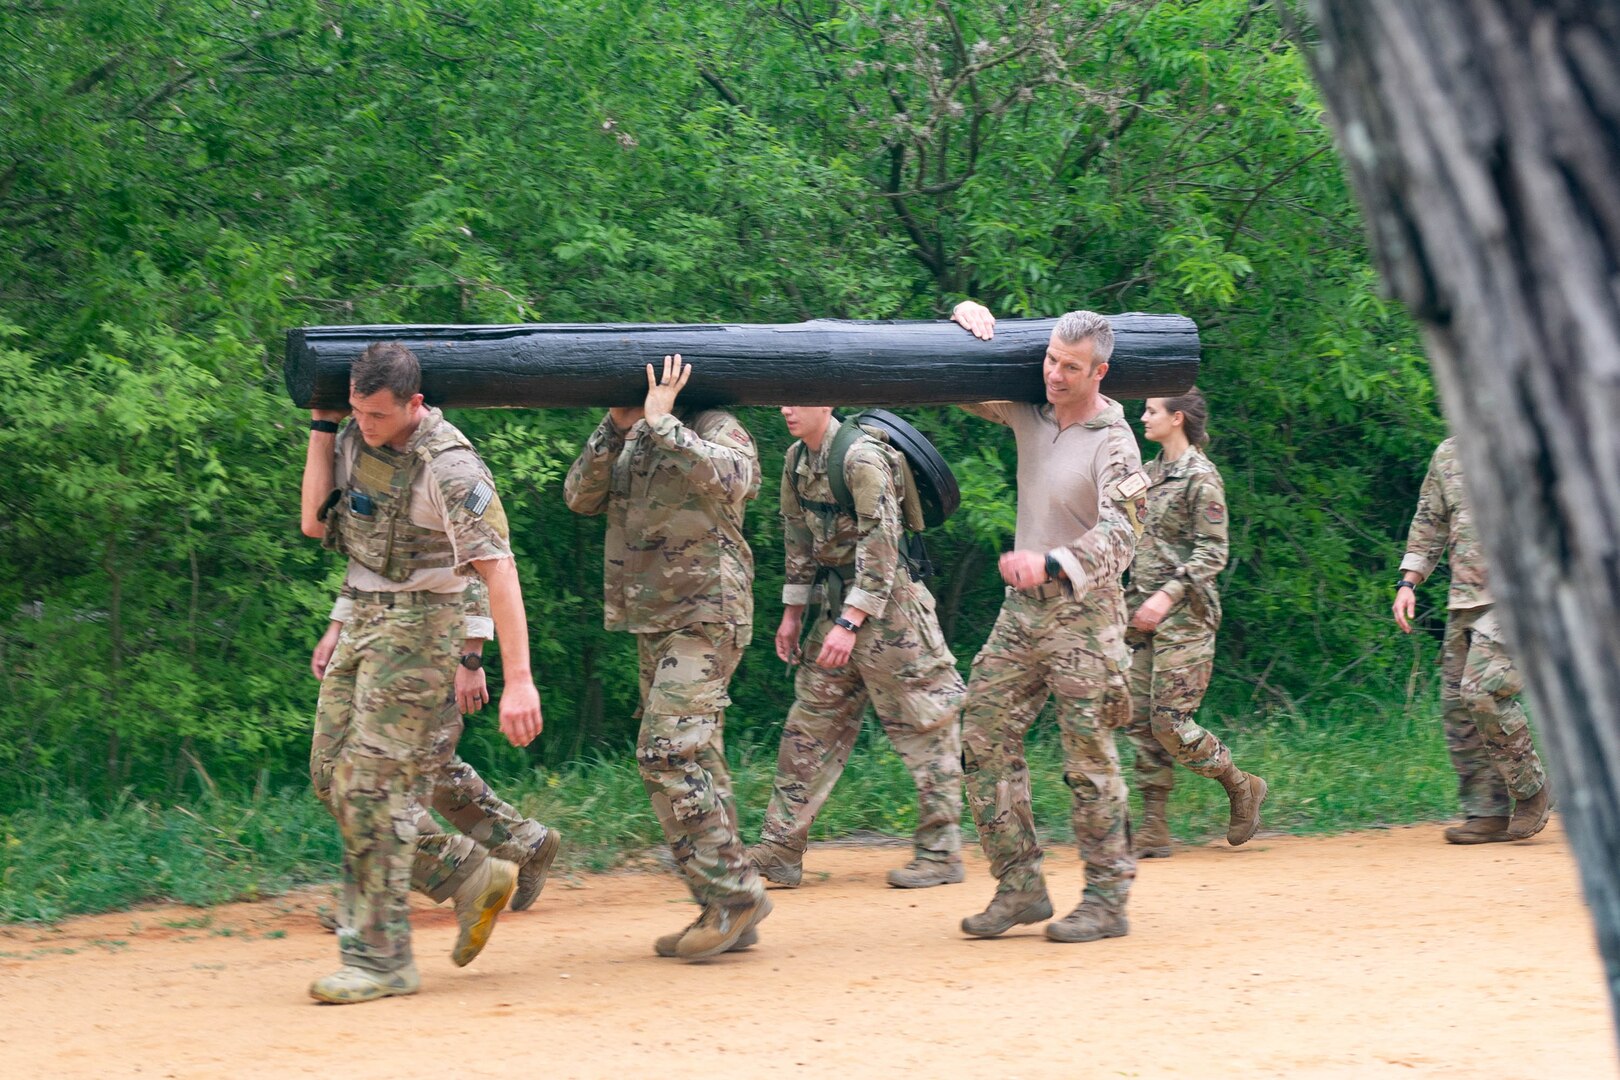 Airmen from the Special Warfare Training Wing carry a memorial log honoring Lt. Col. William Schroeder, a special operations weather officer credited with saving the life of his first sergeant and potentially many others during an active shooter event on Joint Base San Antonio-Lackland, Texas, in 2016.